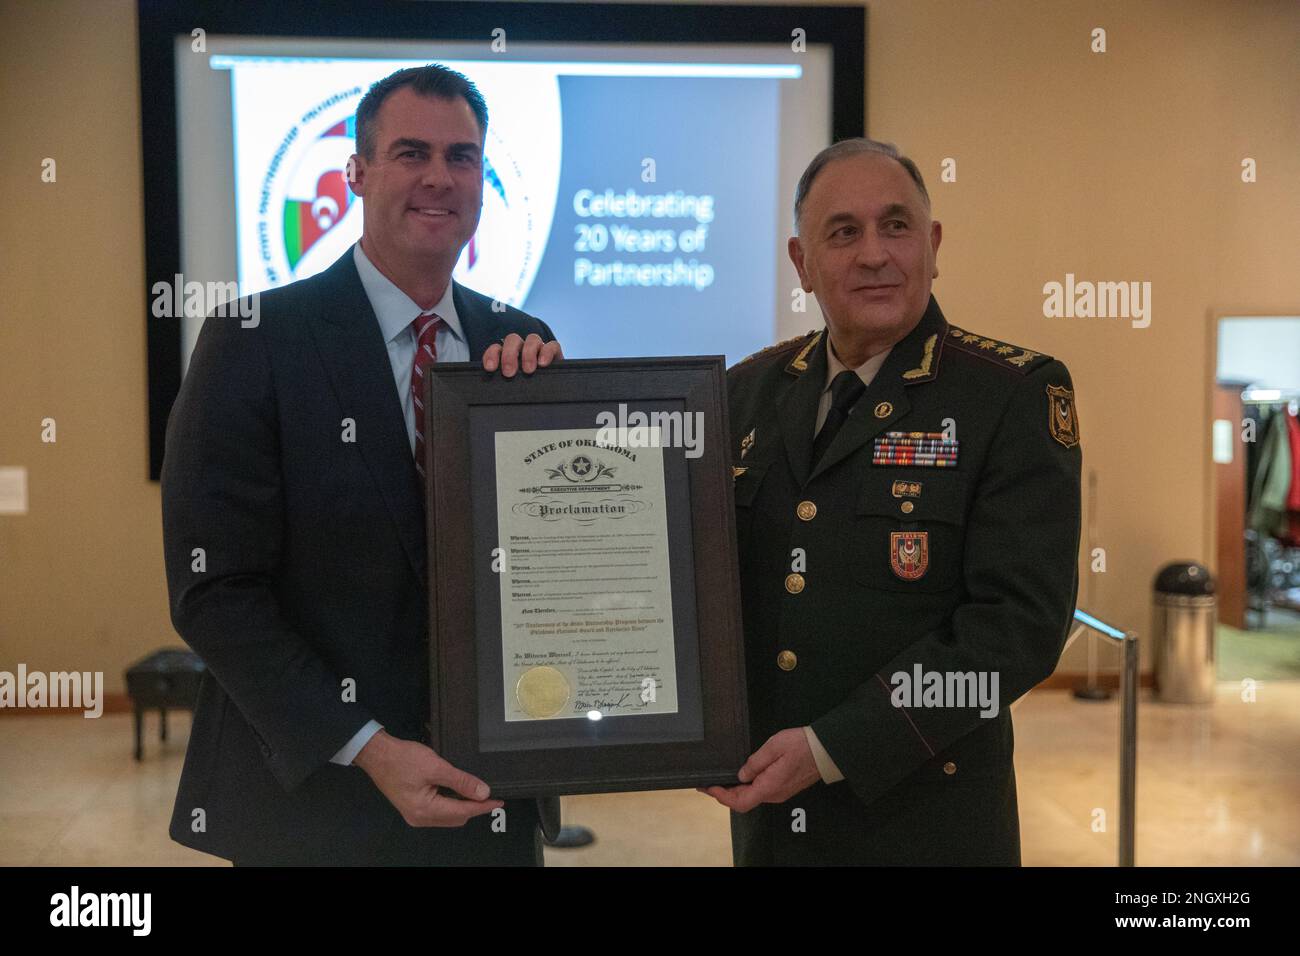 Governor Kevin Stitt presents Colonel General Karim Valiyeva, First Deputy Minister of Defense and Chief of the General Staff of the Azerbaijan Army, a proclamation at the Oklahoma City Museum of Art, November 30, 2022. Oklahoma National Guard leaders and a delegation from Azerbaijan met to celebrate 20 years of the state partnership program between Oklahoma and Azerbaijan. (Oklahoma National Guard photo by Sgt. Reece Heck) Stock Photo